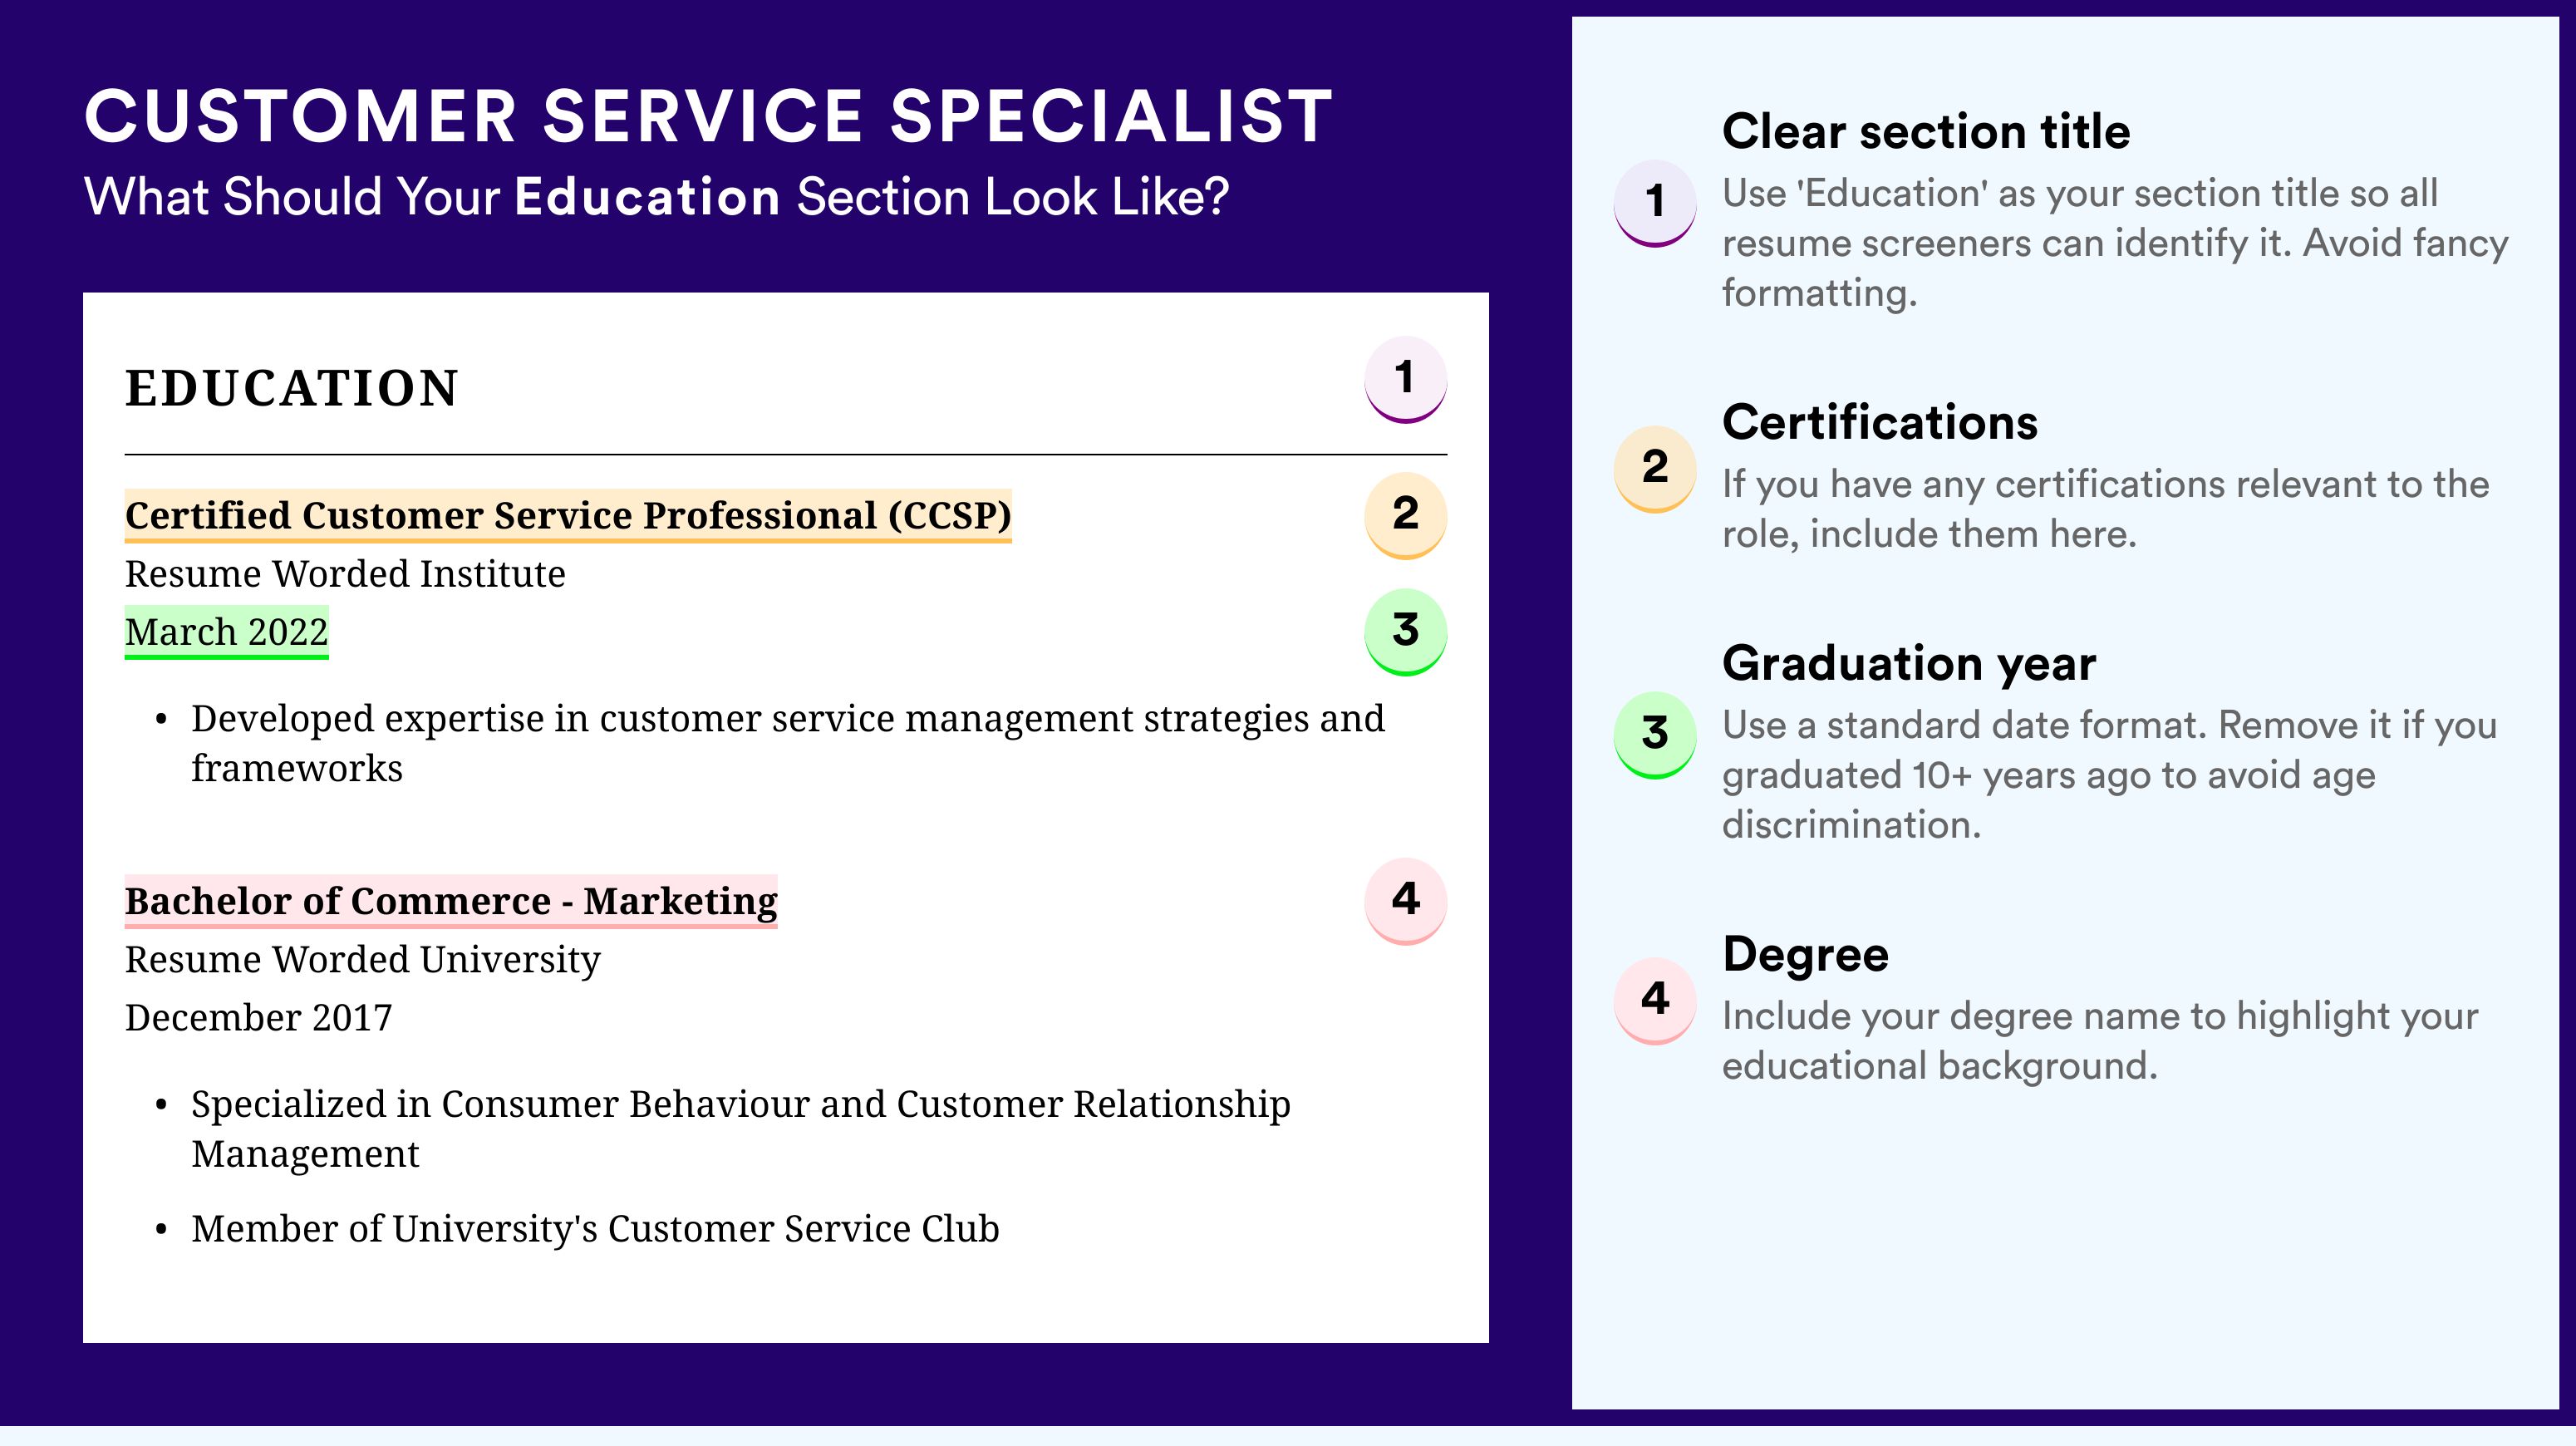 How To Write An Education Section - Customer Service Specialist Roles